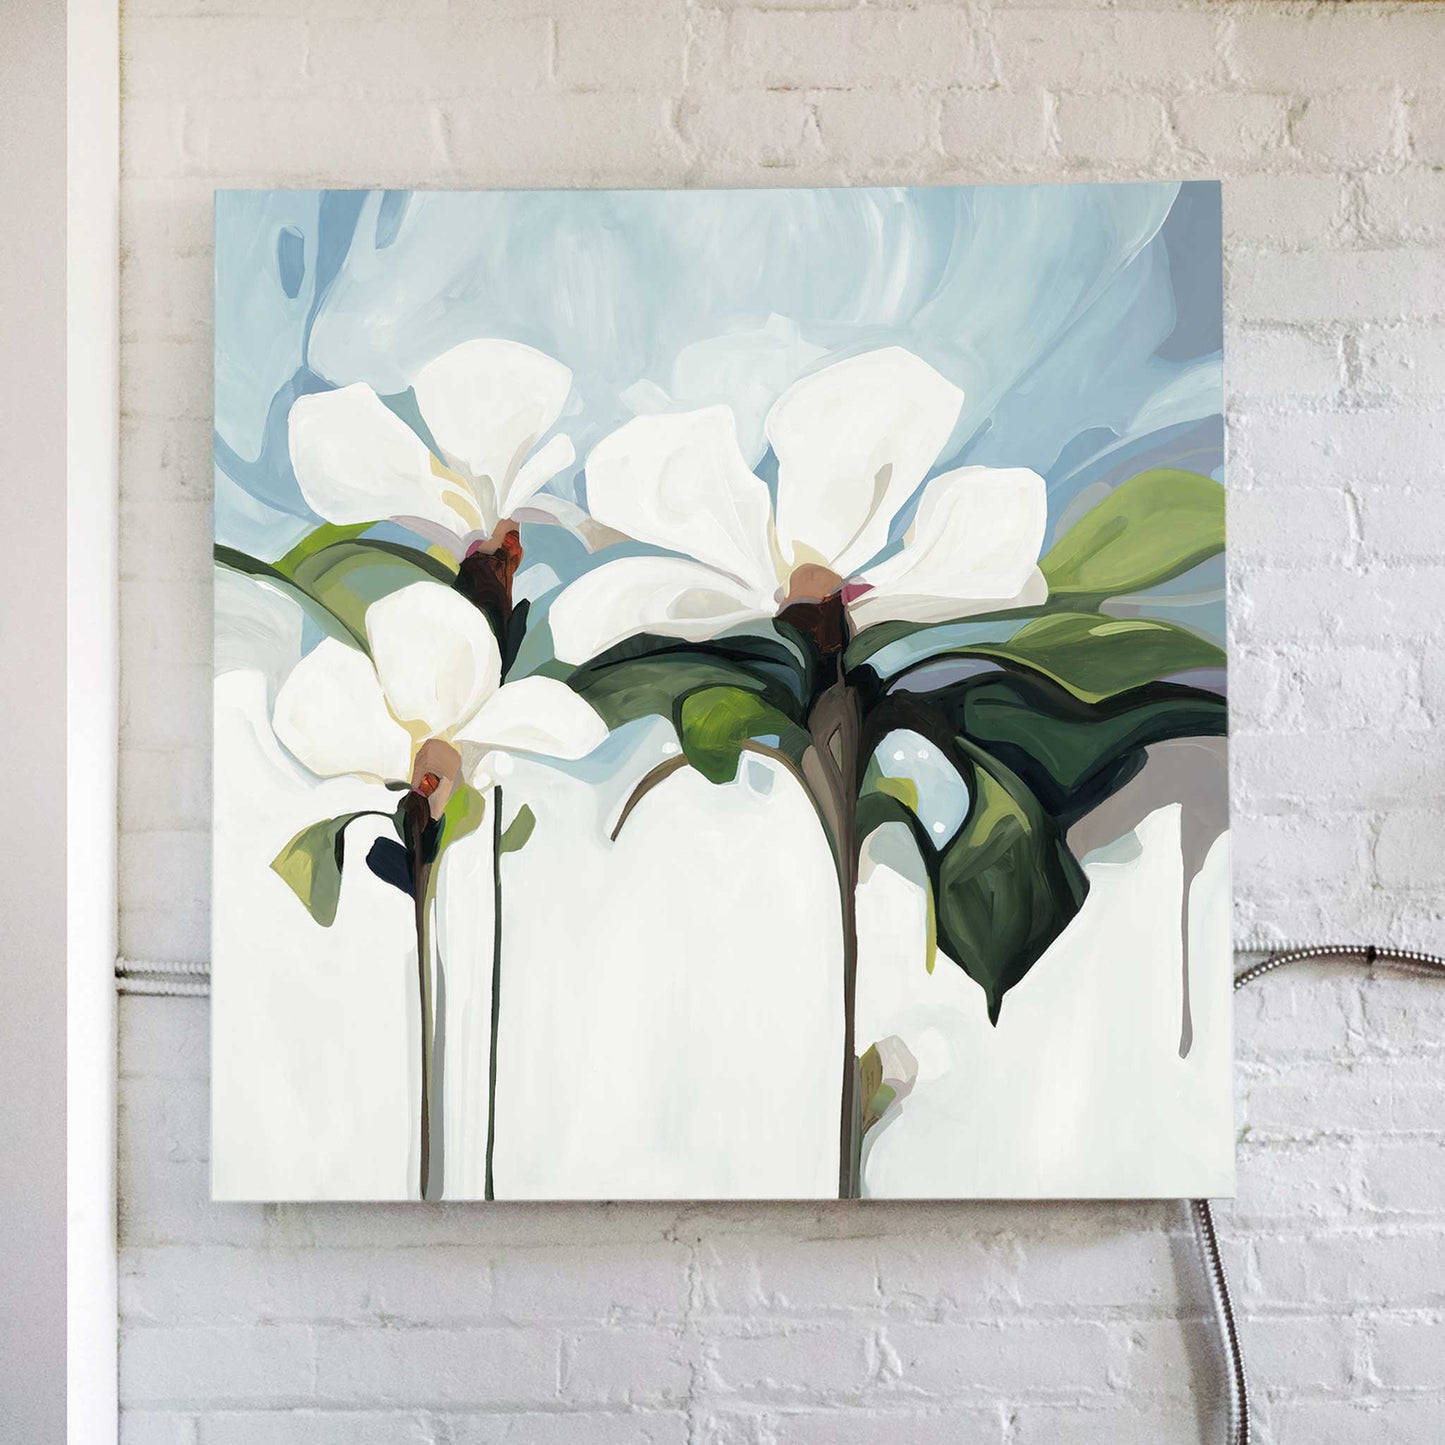 acrylic flower painting abstract floral by Canadian artist Susannah Bleasby